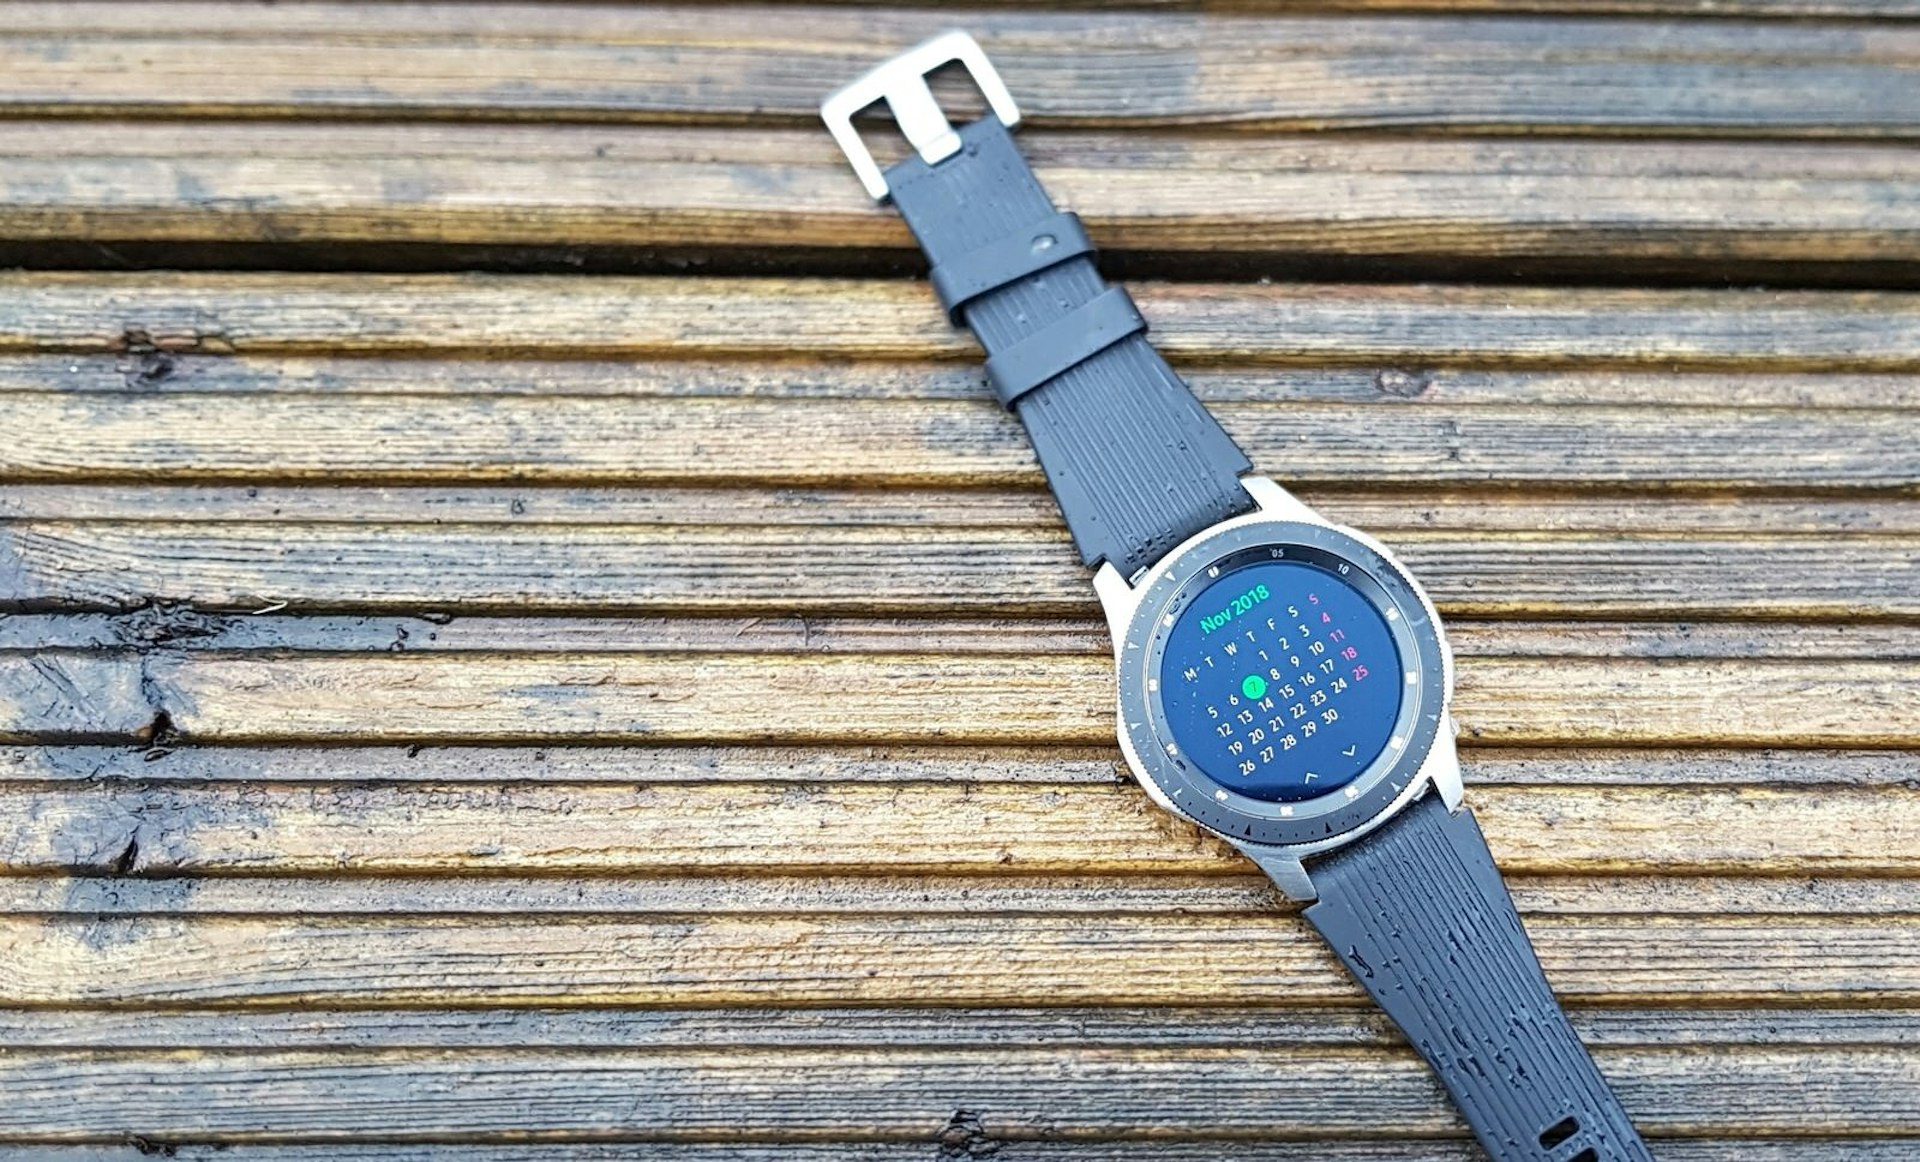 The Samsung Galaxy Watch, shown with a calendar displayed on the face and black strap